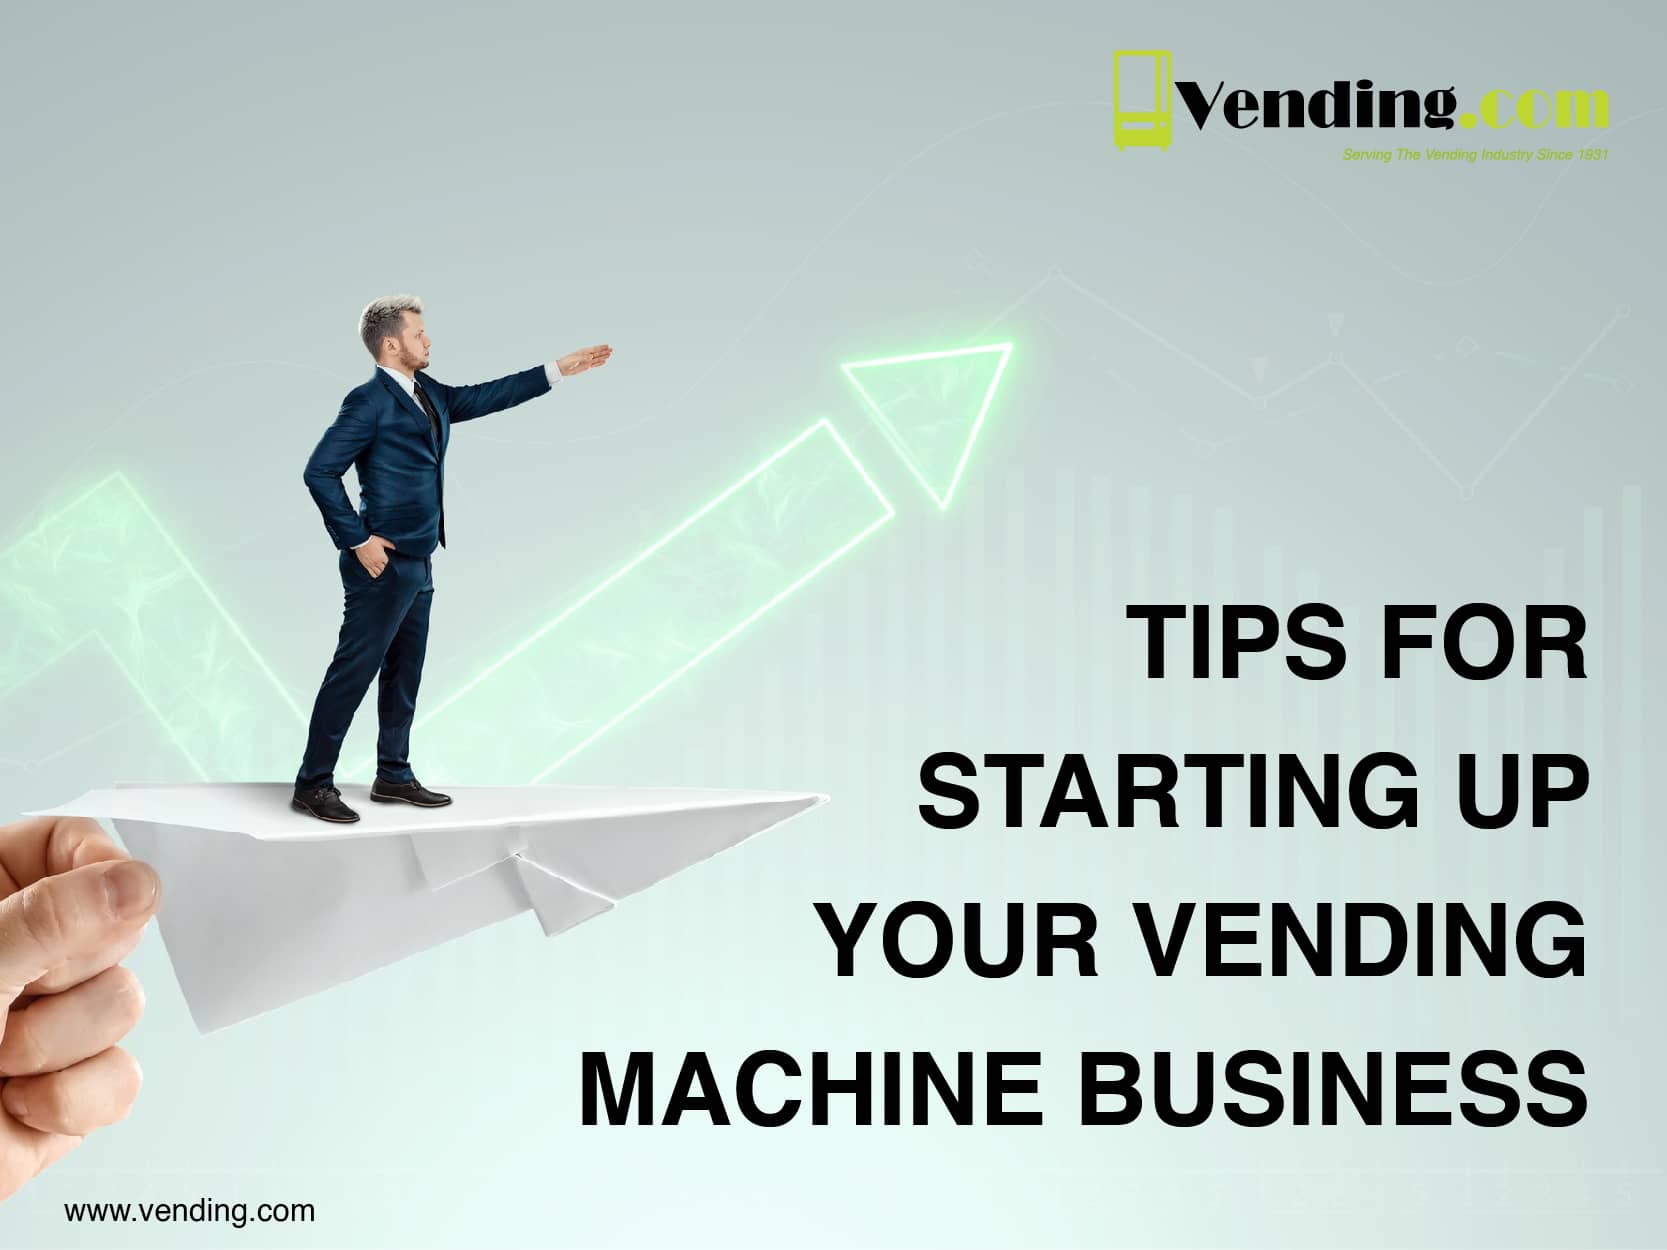 Ready to Vend: 10-Step Guide for Launching Your Successful Vending Machine Business